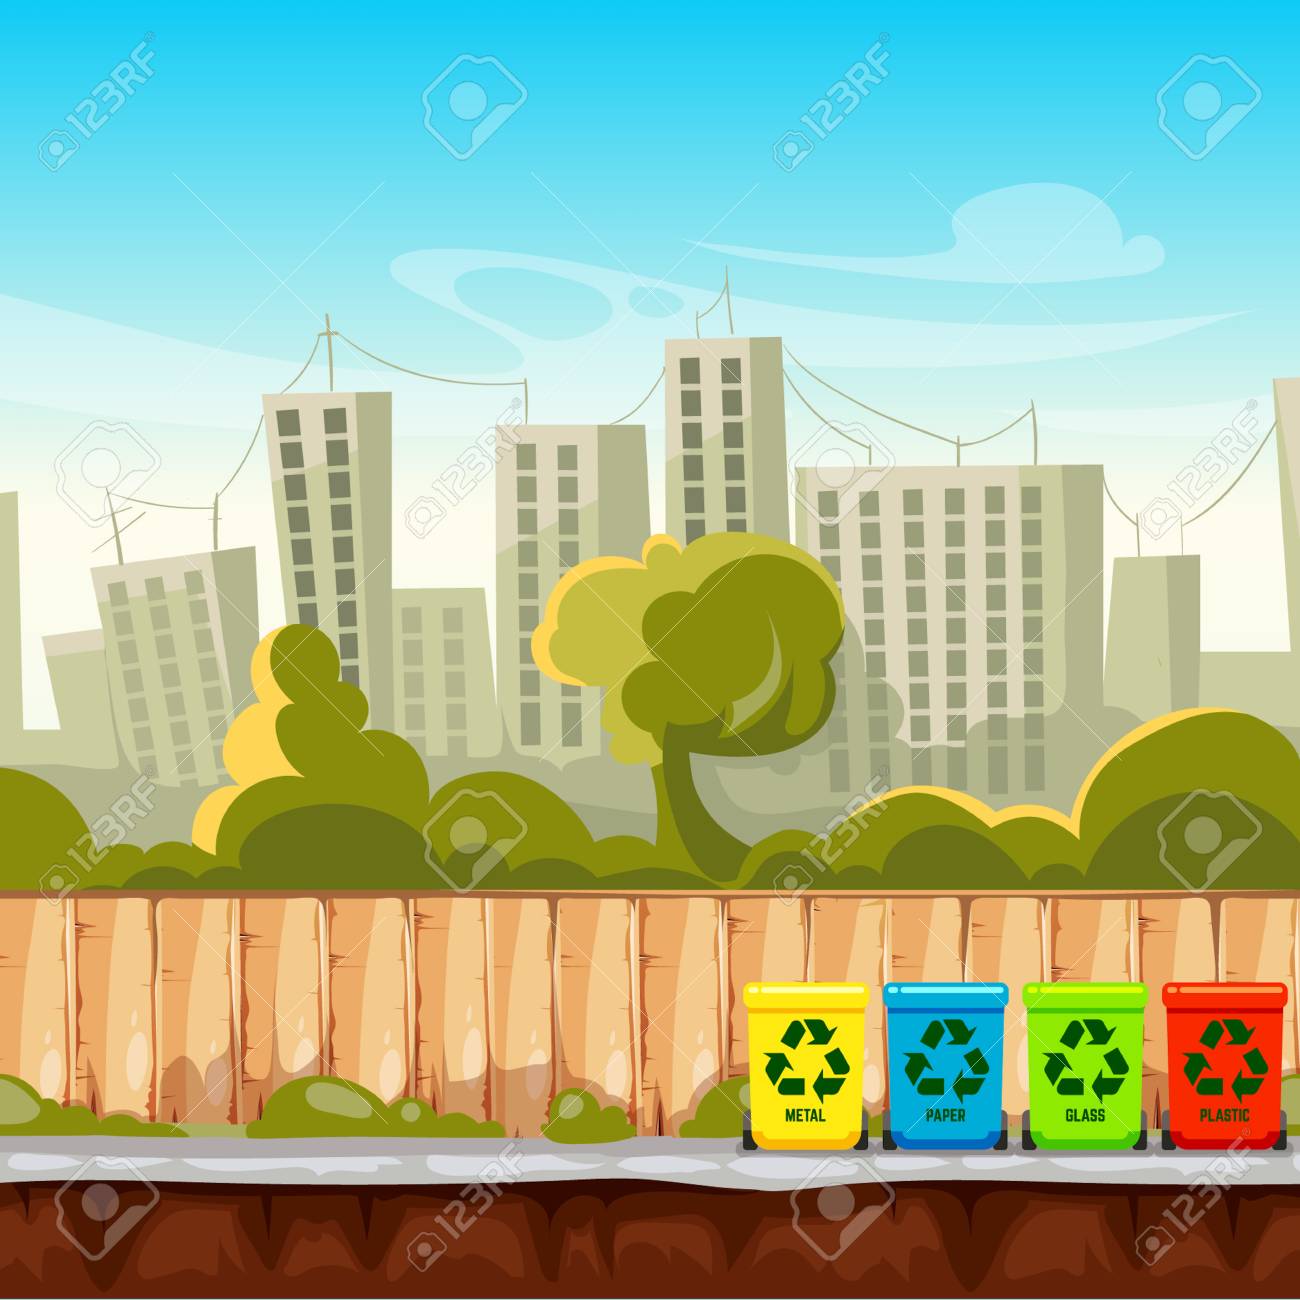 Recycle Waste Bins With Cityscape Background Management